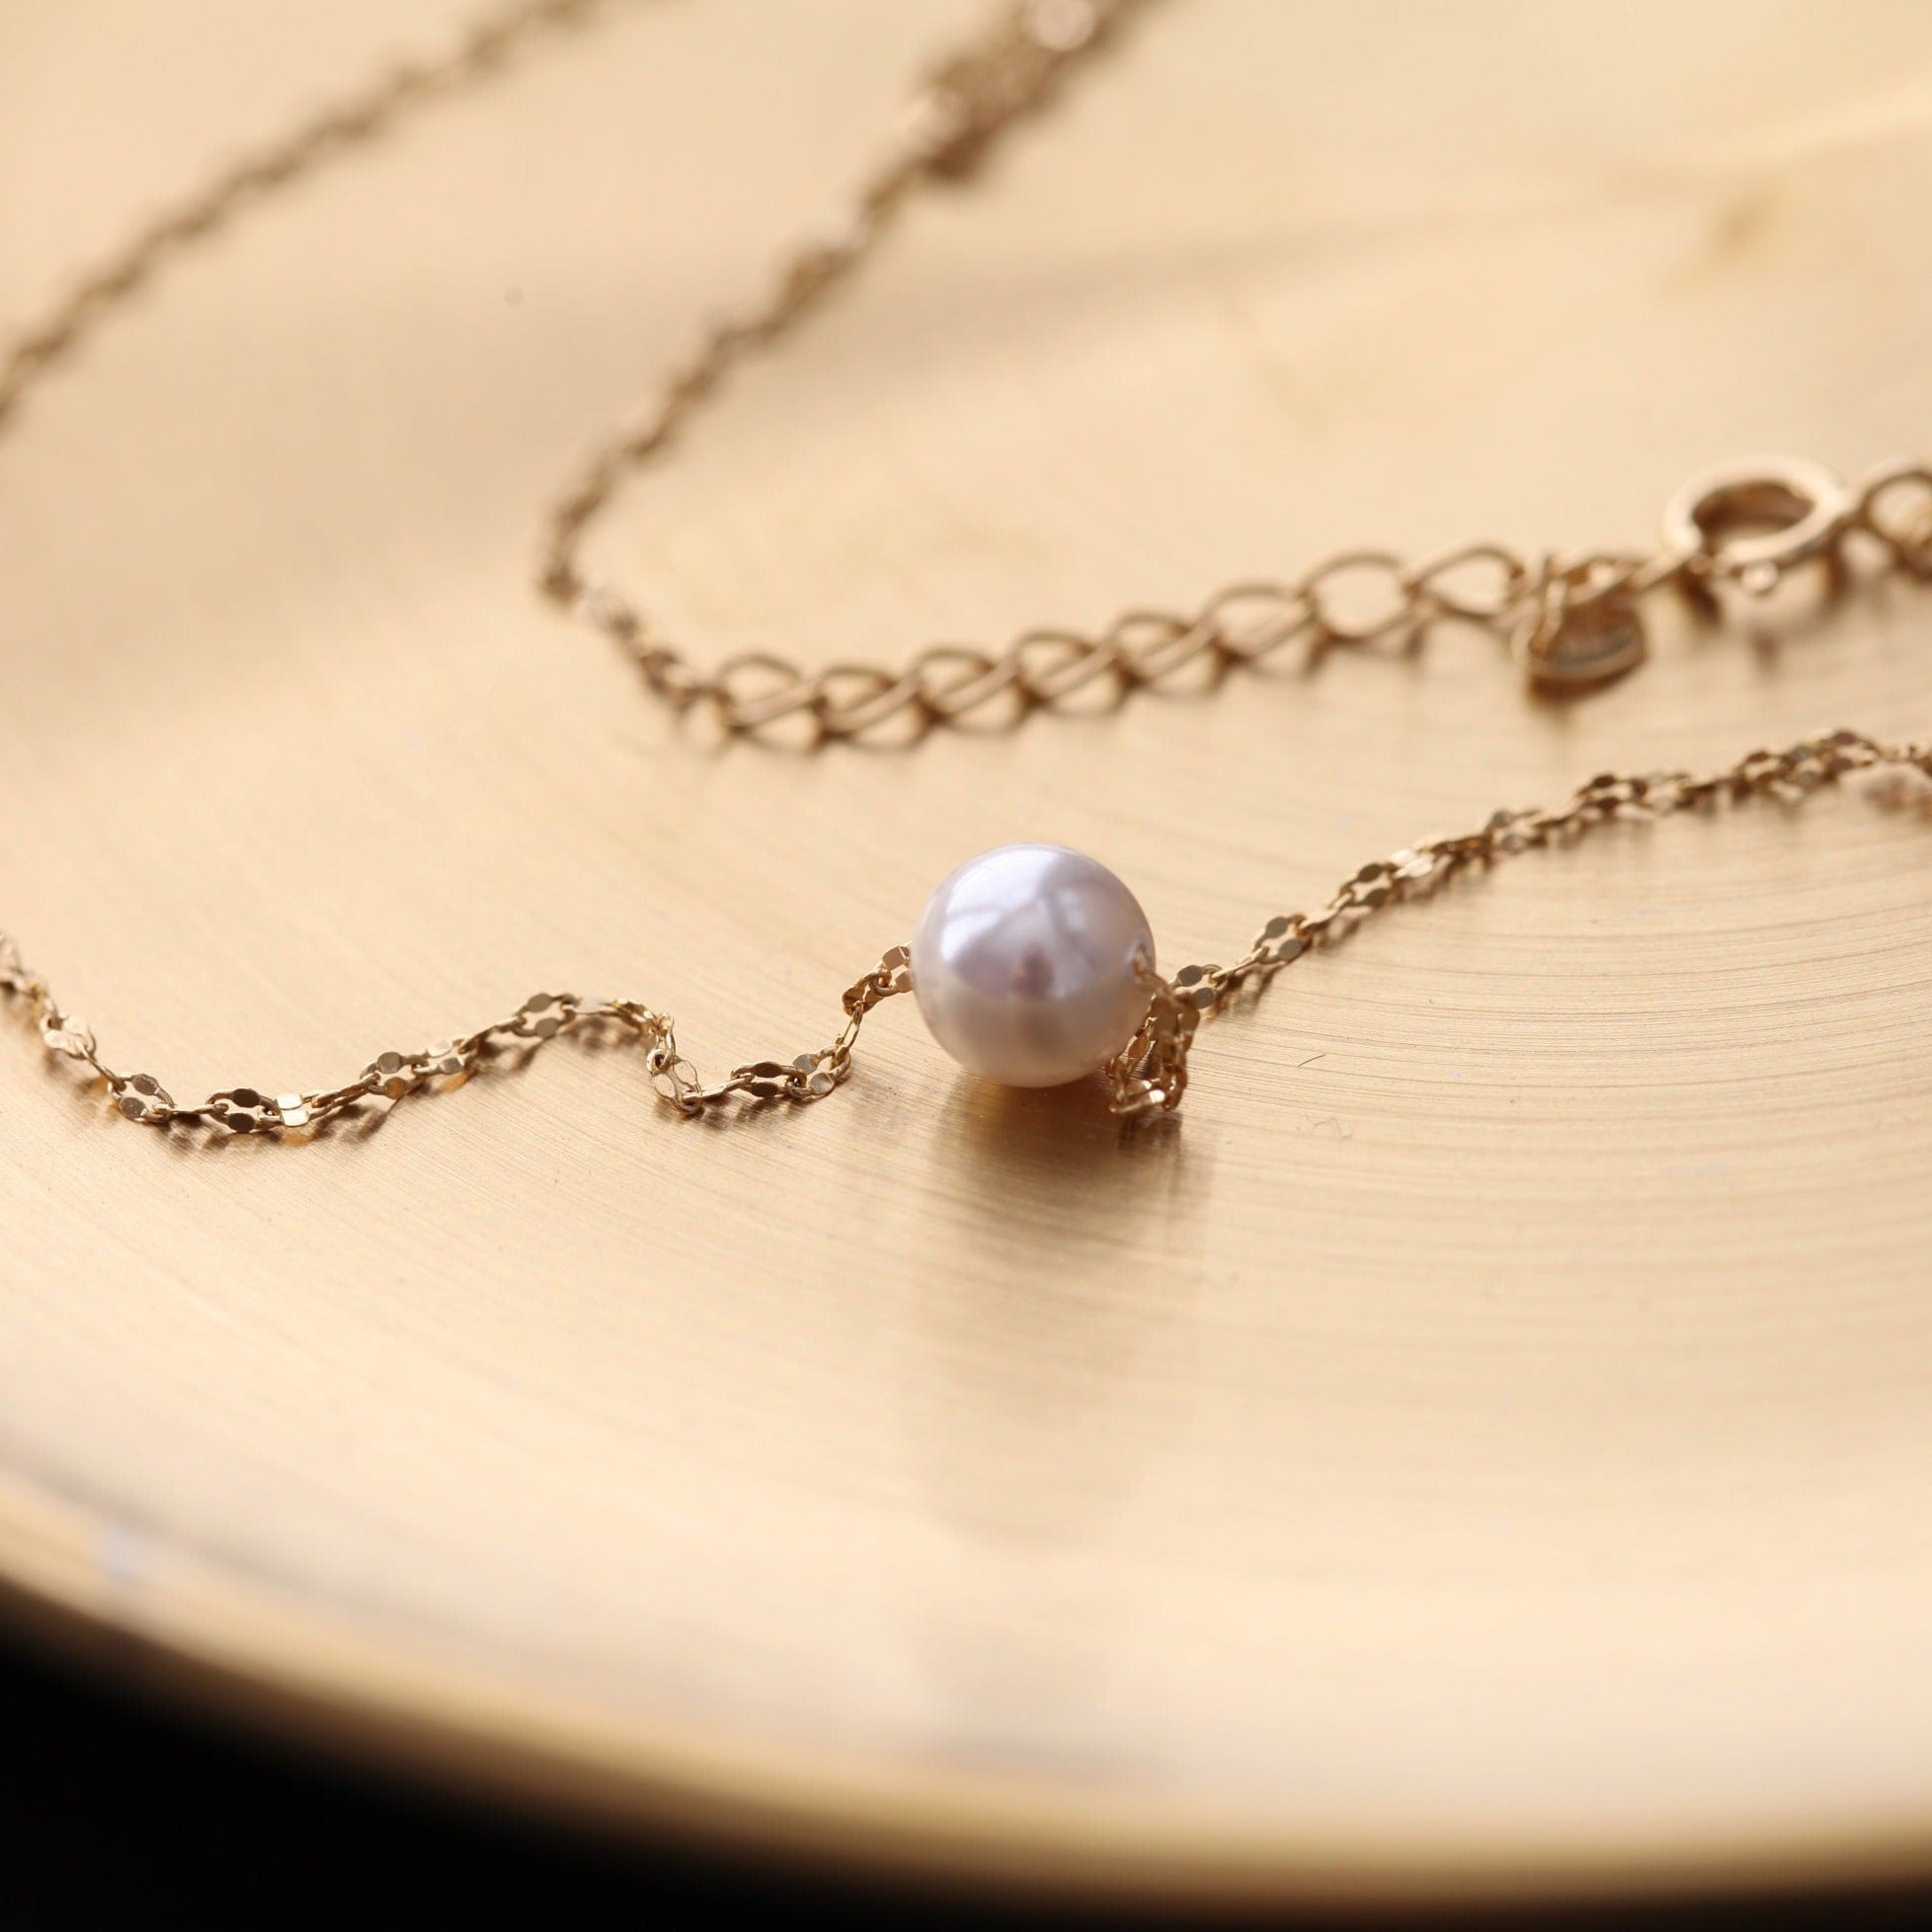 3.5mm Pearl Necklace Dainty White Cultured Round Small Tiny Freshwater Seed  | eBay